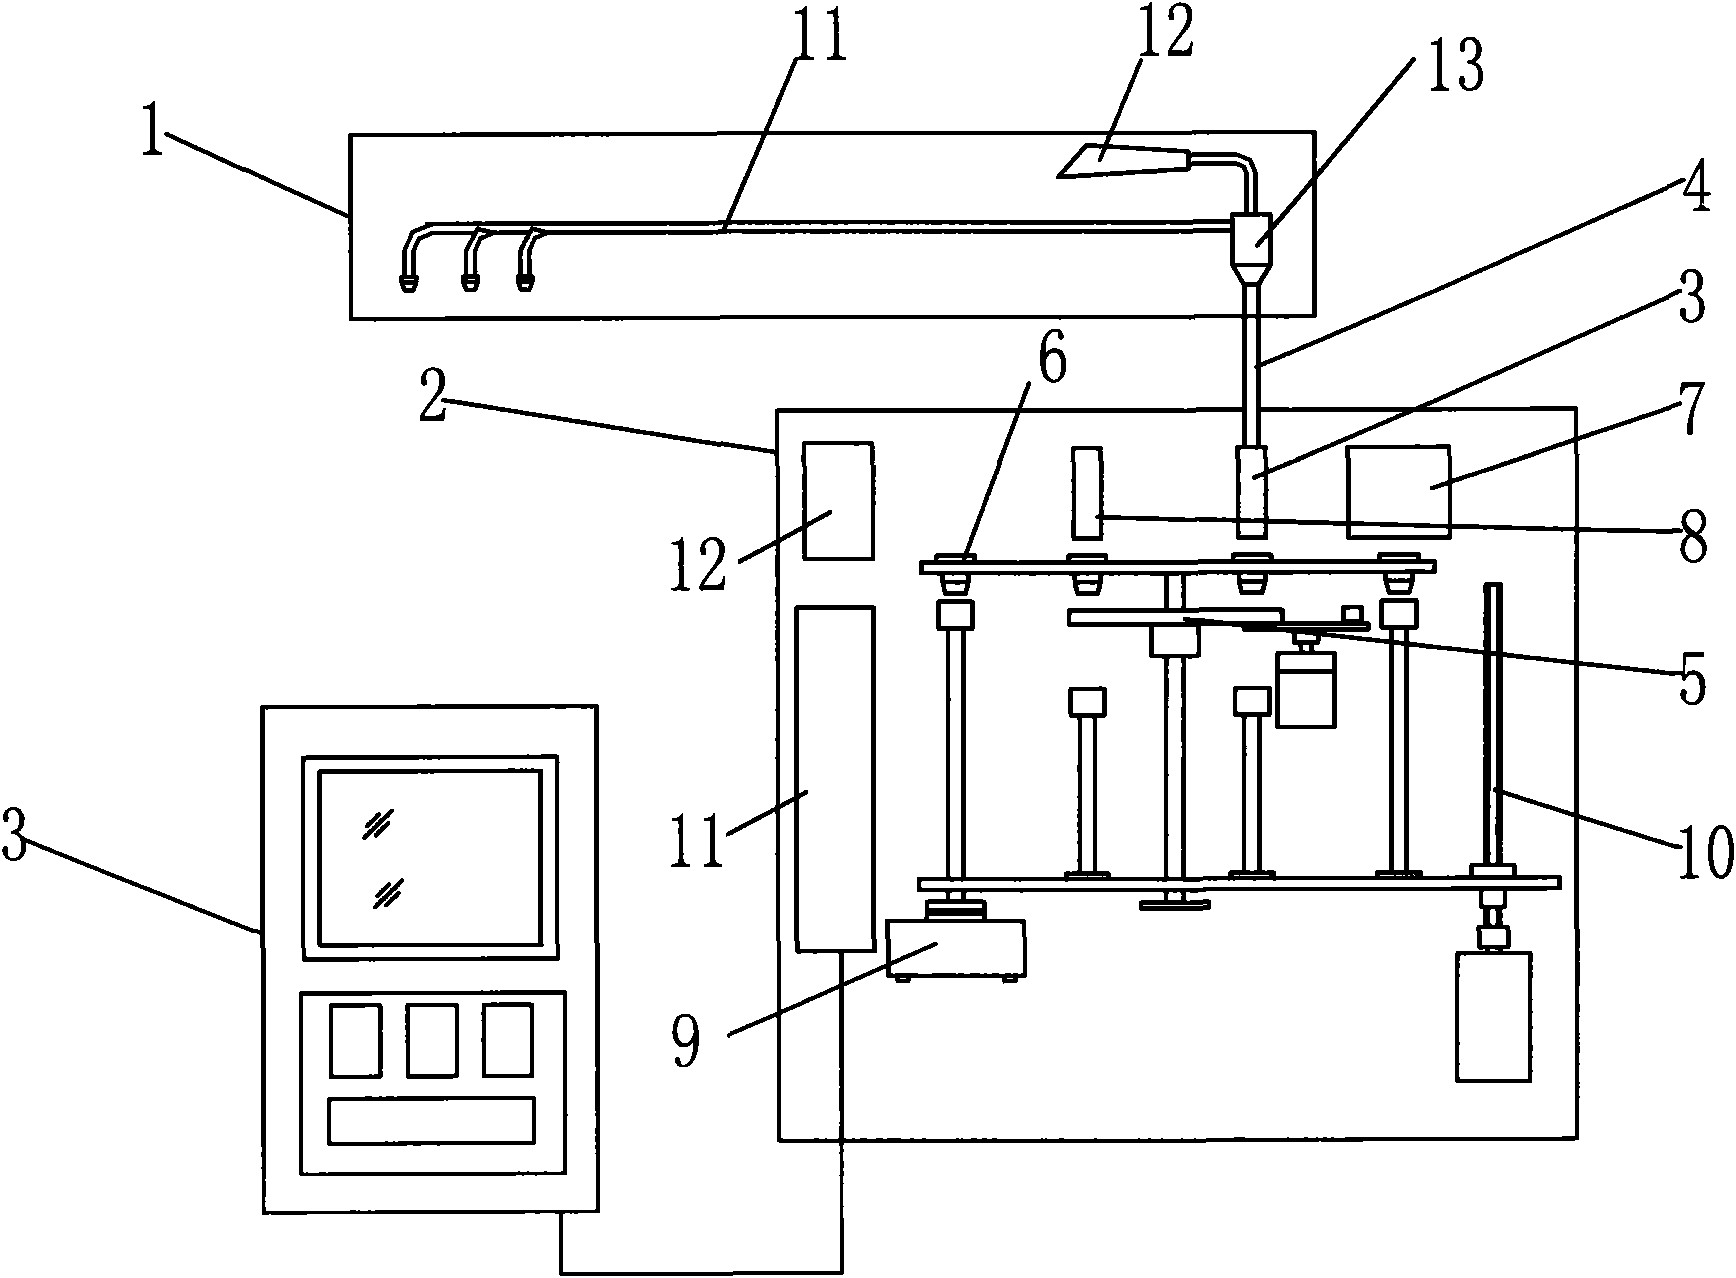 Measurement device for residual carbon quantity in fly ash